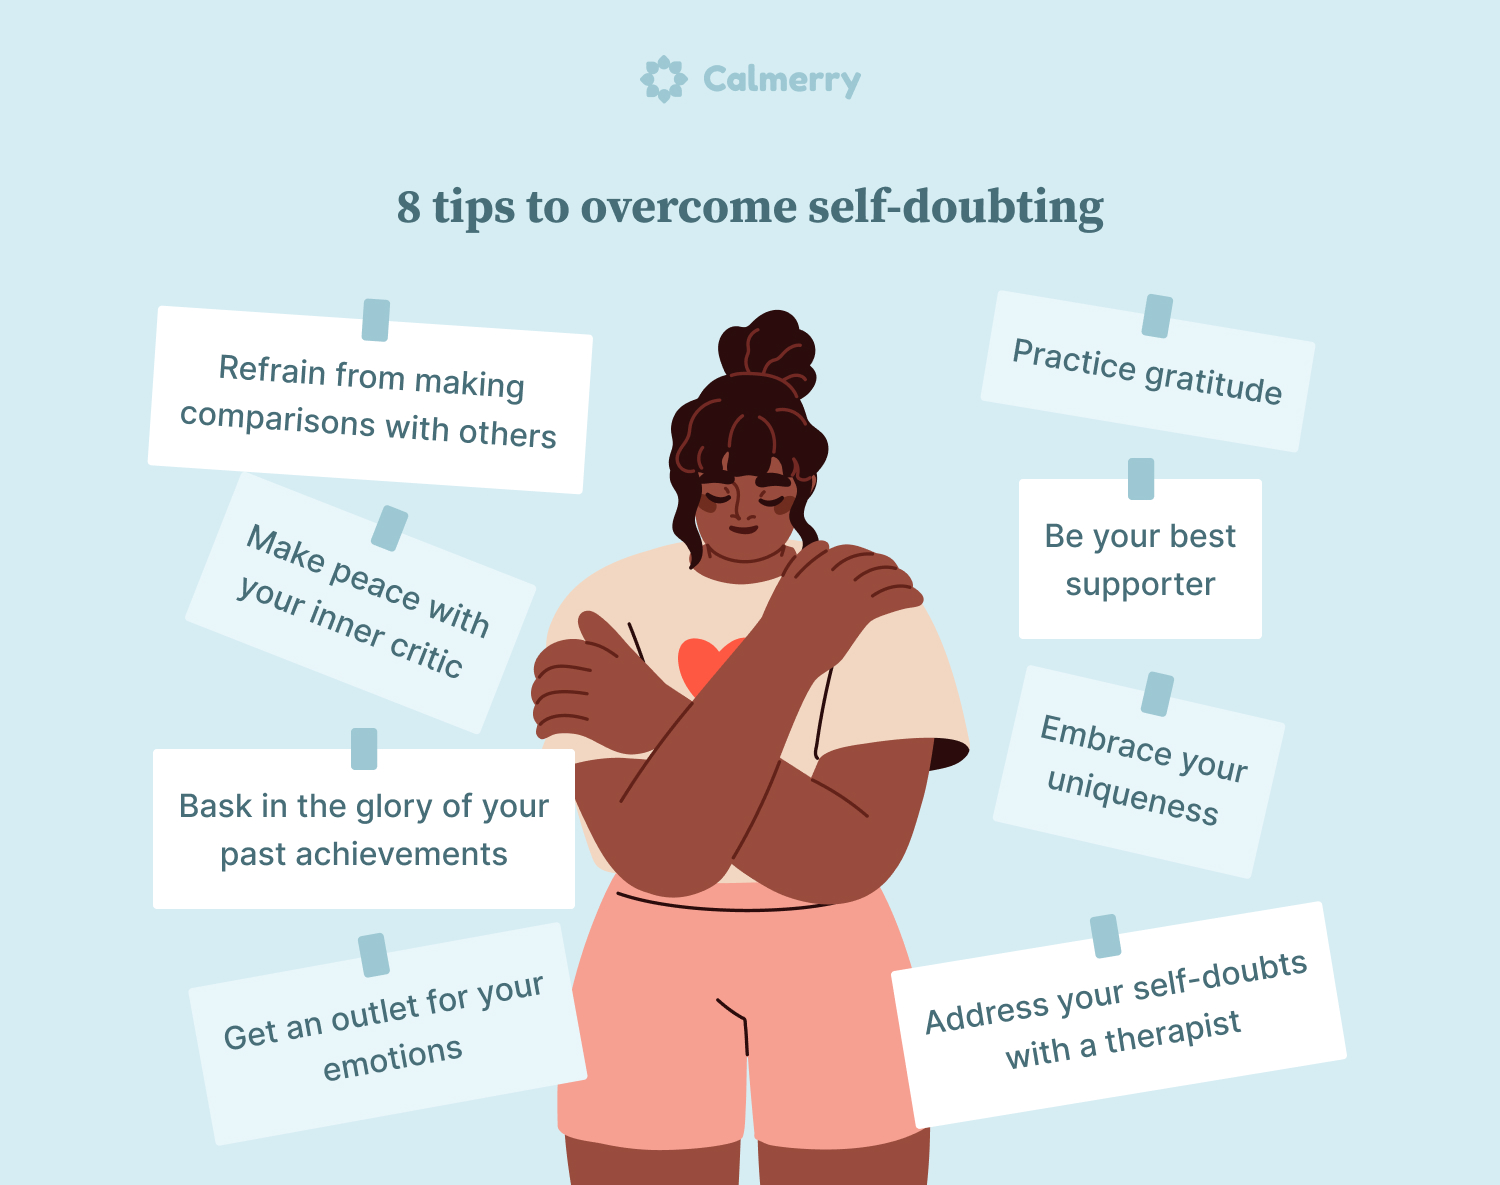 8 tips to overcome self-doubting 1. Refrain from making comparisons with others 2. Make peace with your inner critic 3. Bask in the glory of your past achievements 4. Get an outlet for your emotions 5. Practice gratitude 6. Be your best supporter 7. Embrace your uniqueness 8. Address your self-doubts with a therapist